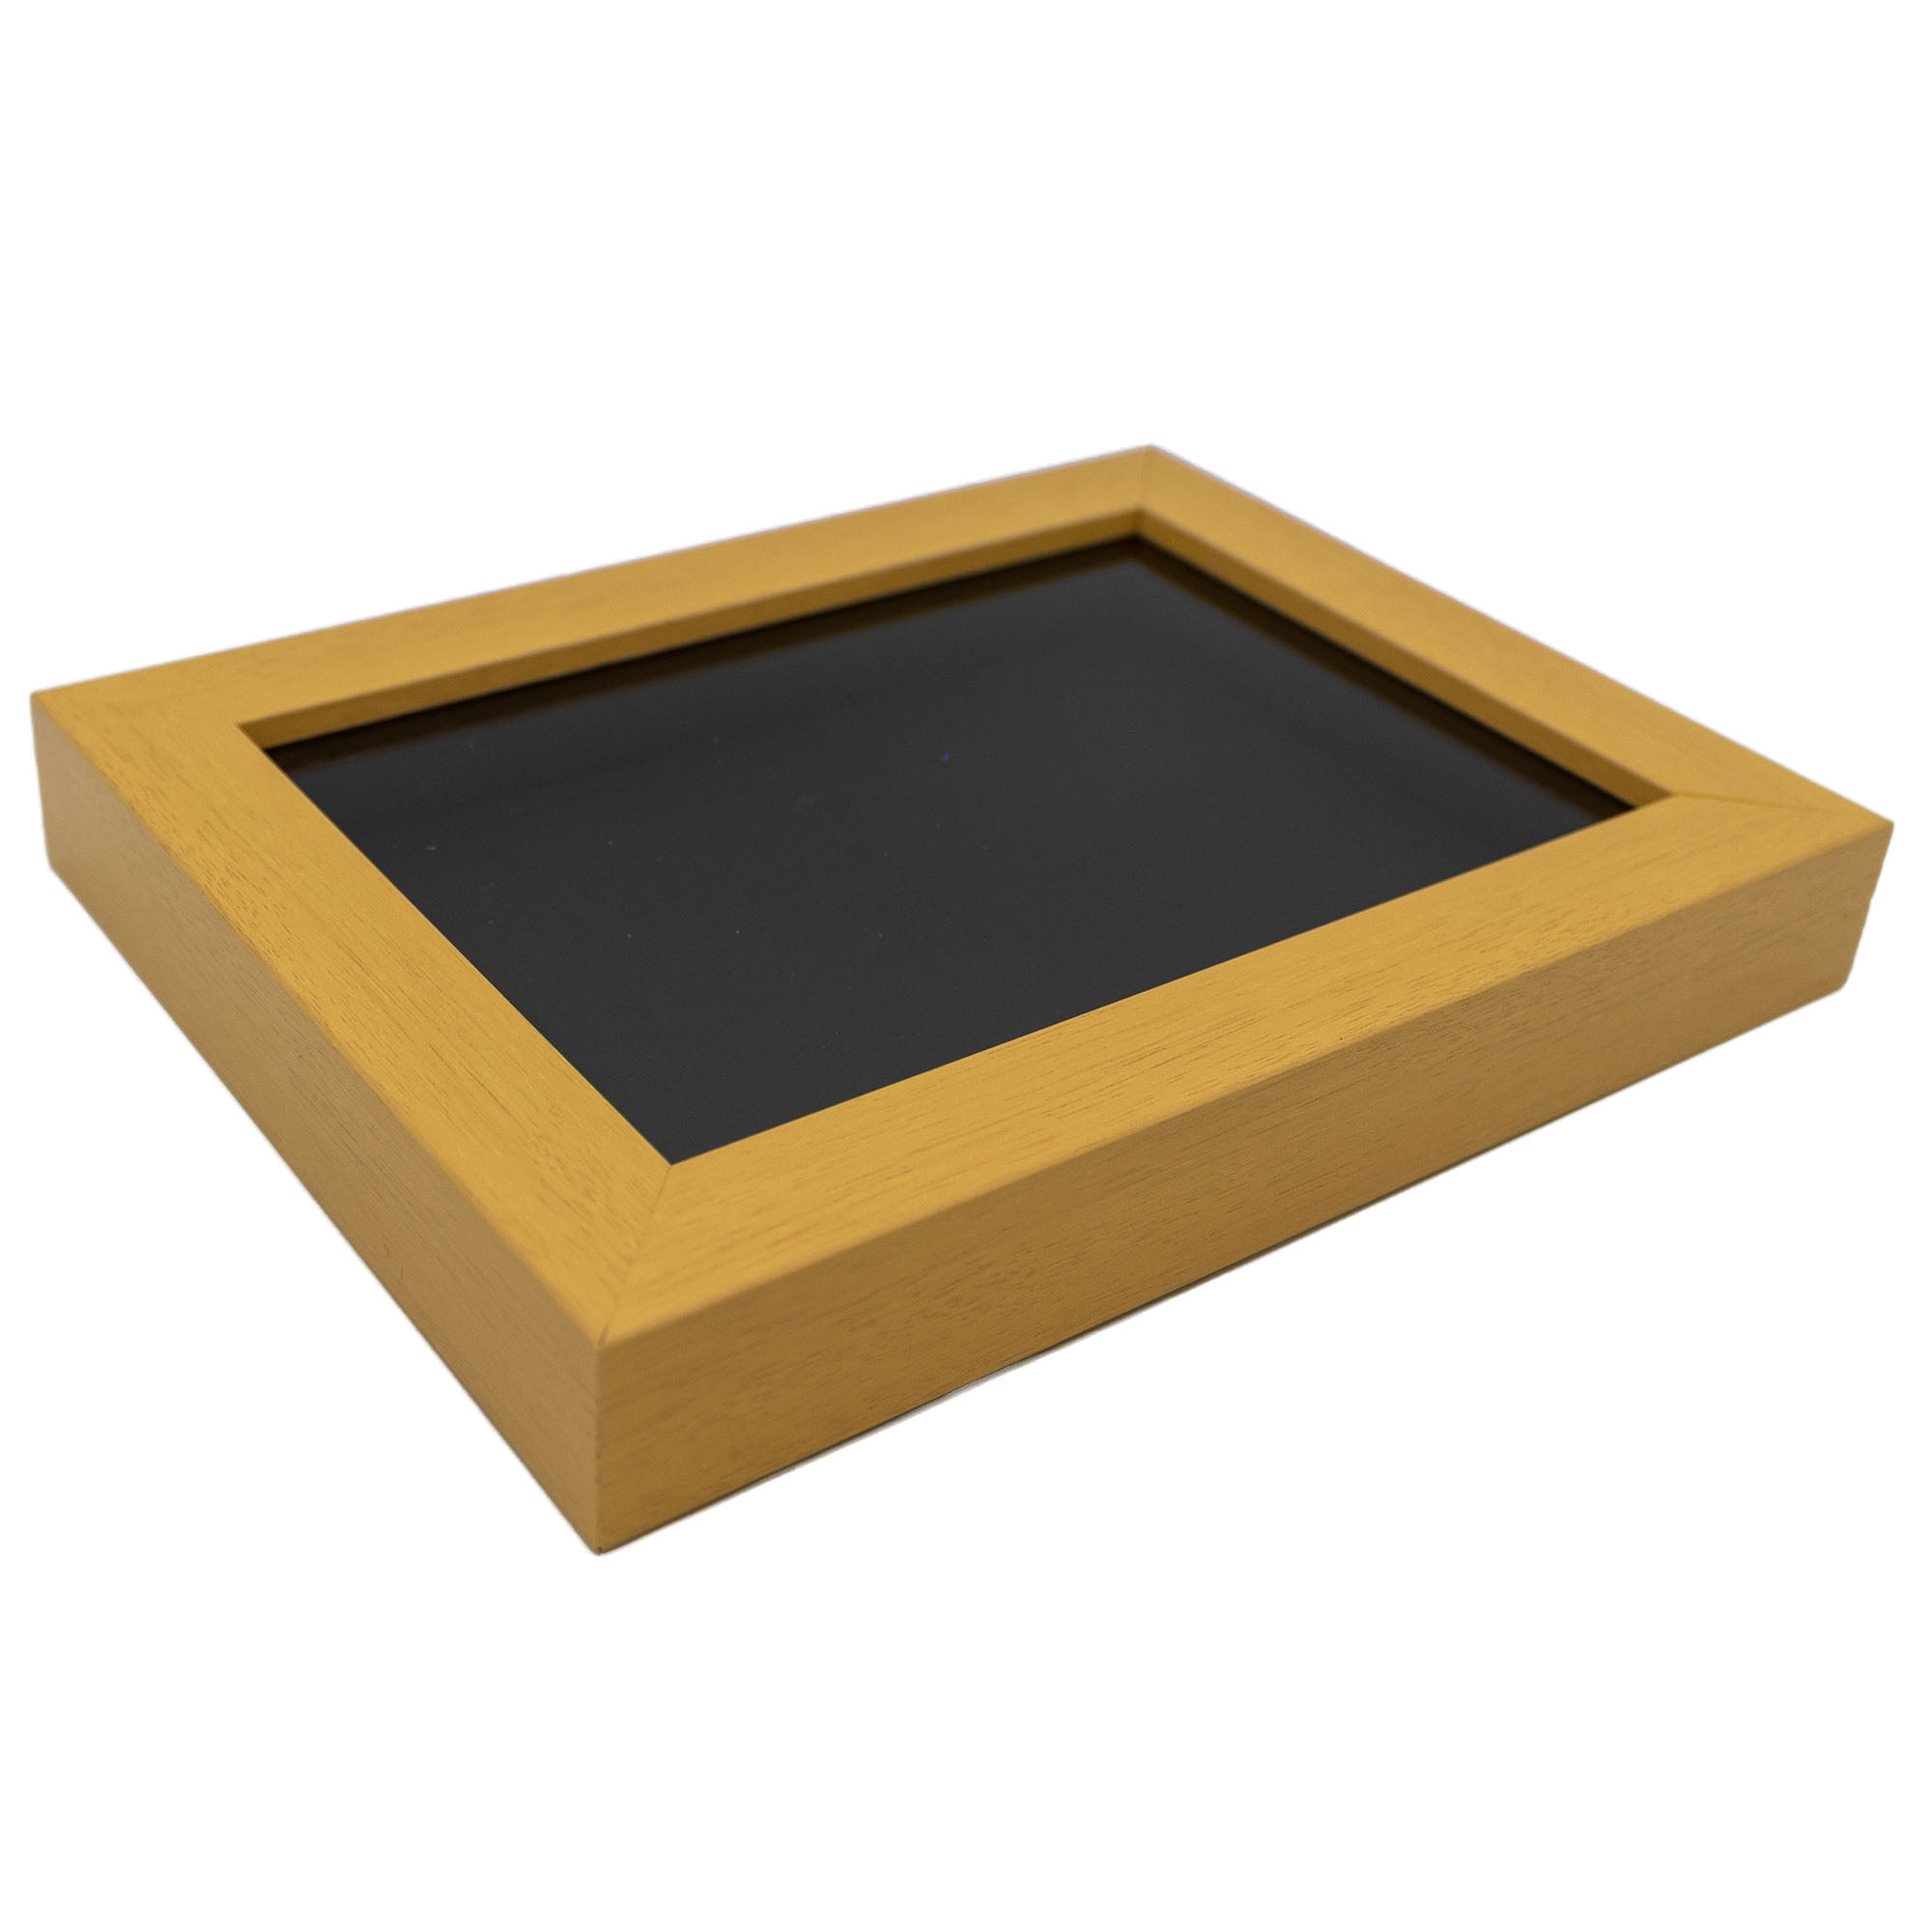 Honey Pecan 8x8 Wood Shadow Box with Gold Acid-Free Backing - With